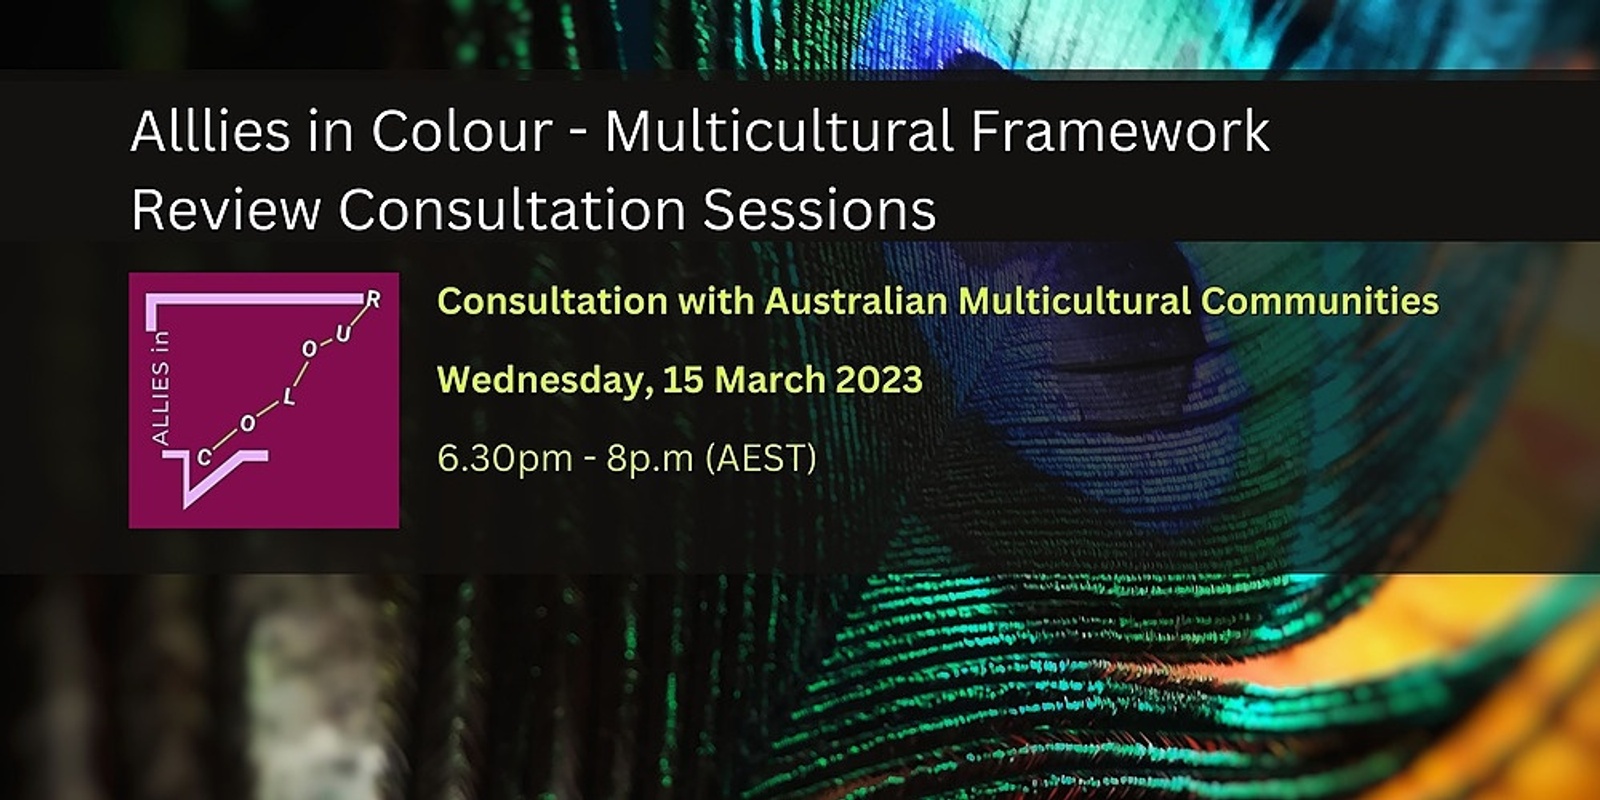 Banner image for Australian Multicultural Communities - Australia's Multicultural Framework Review Consultation Session by Allies in Colour 